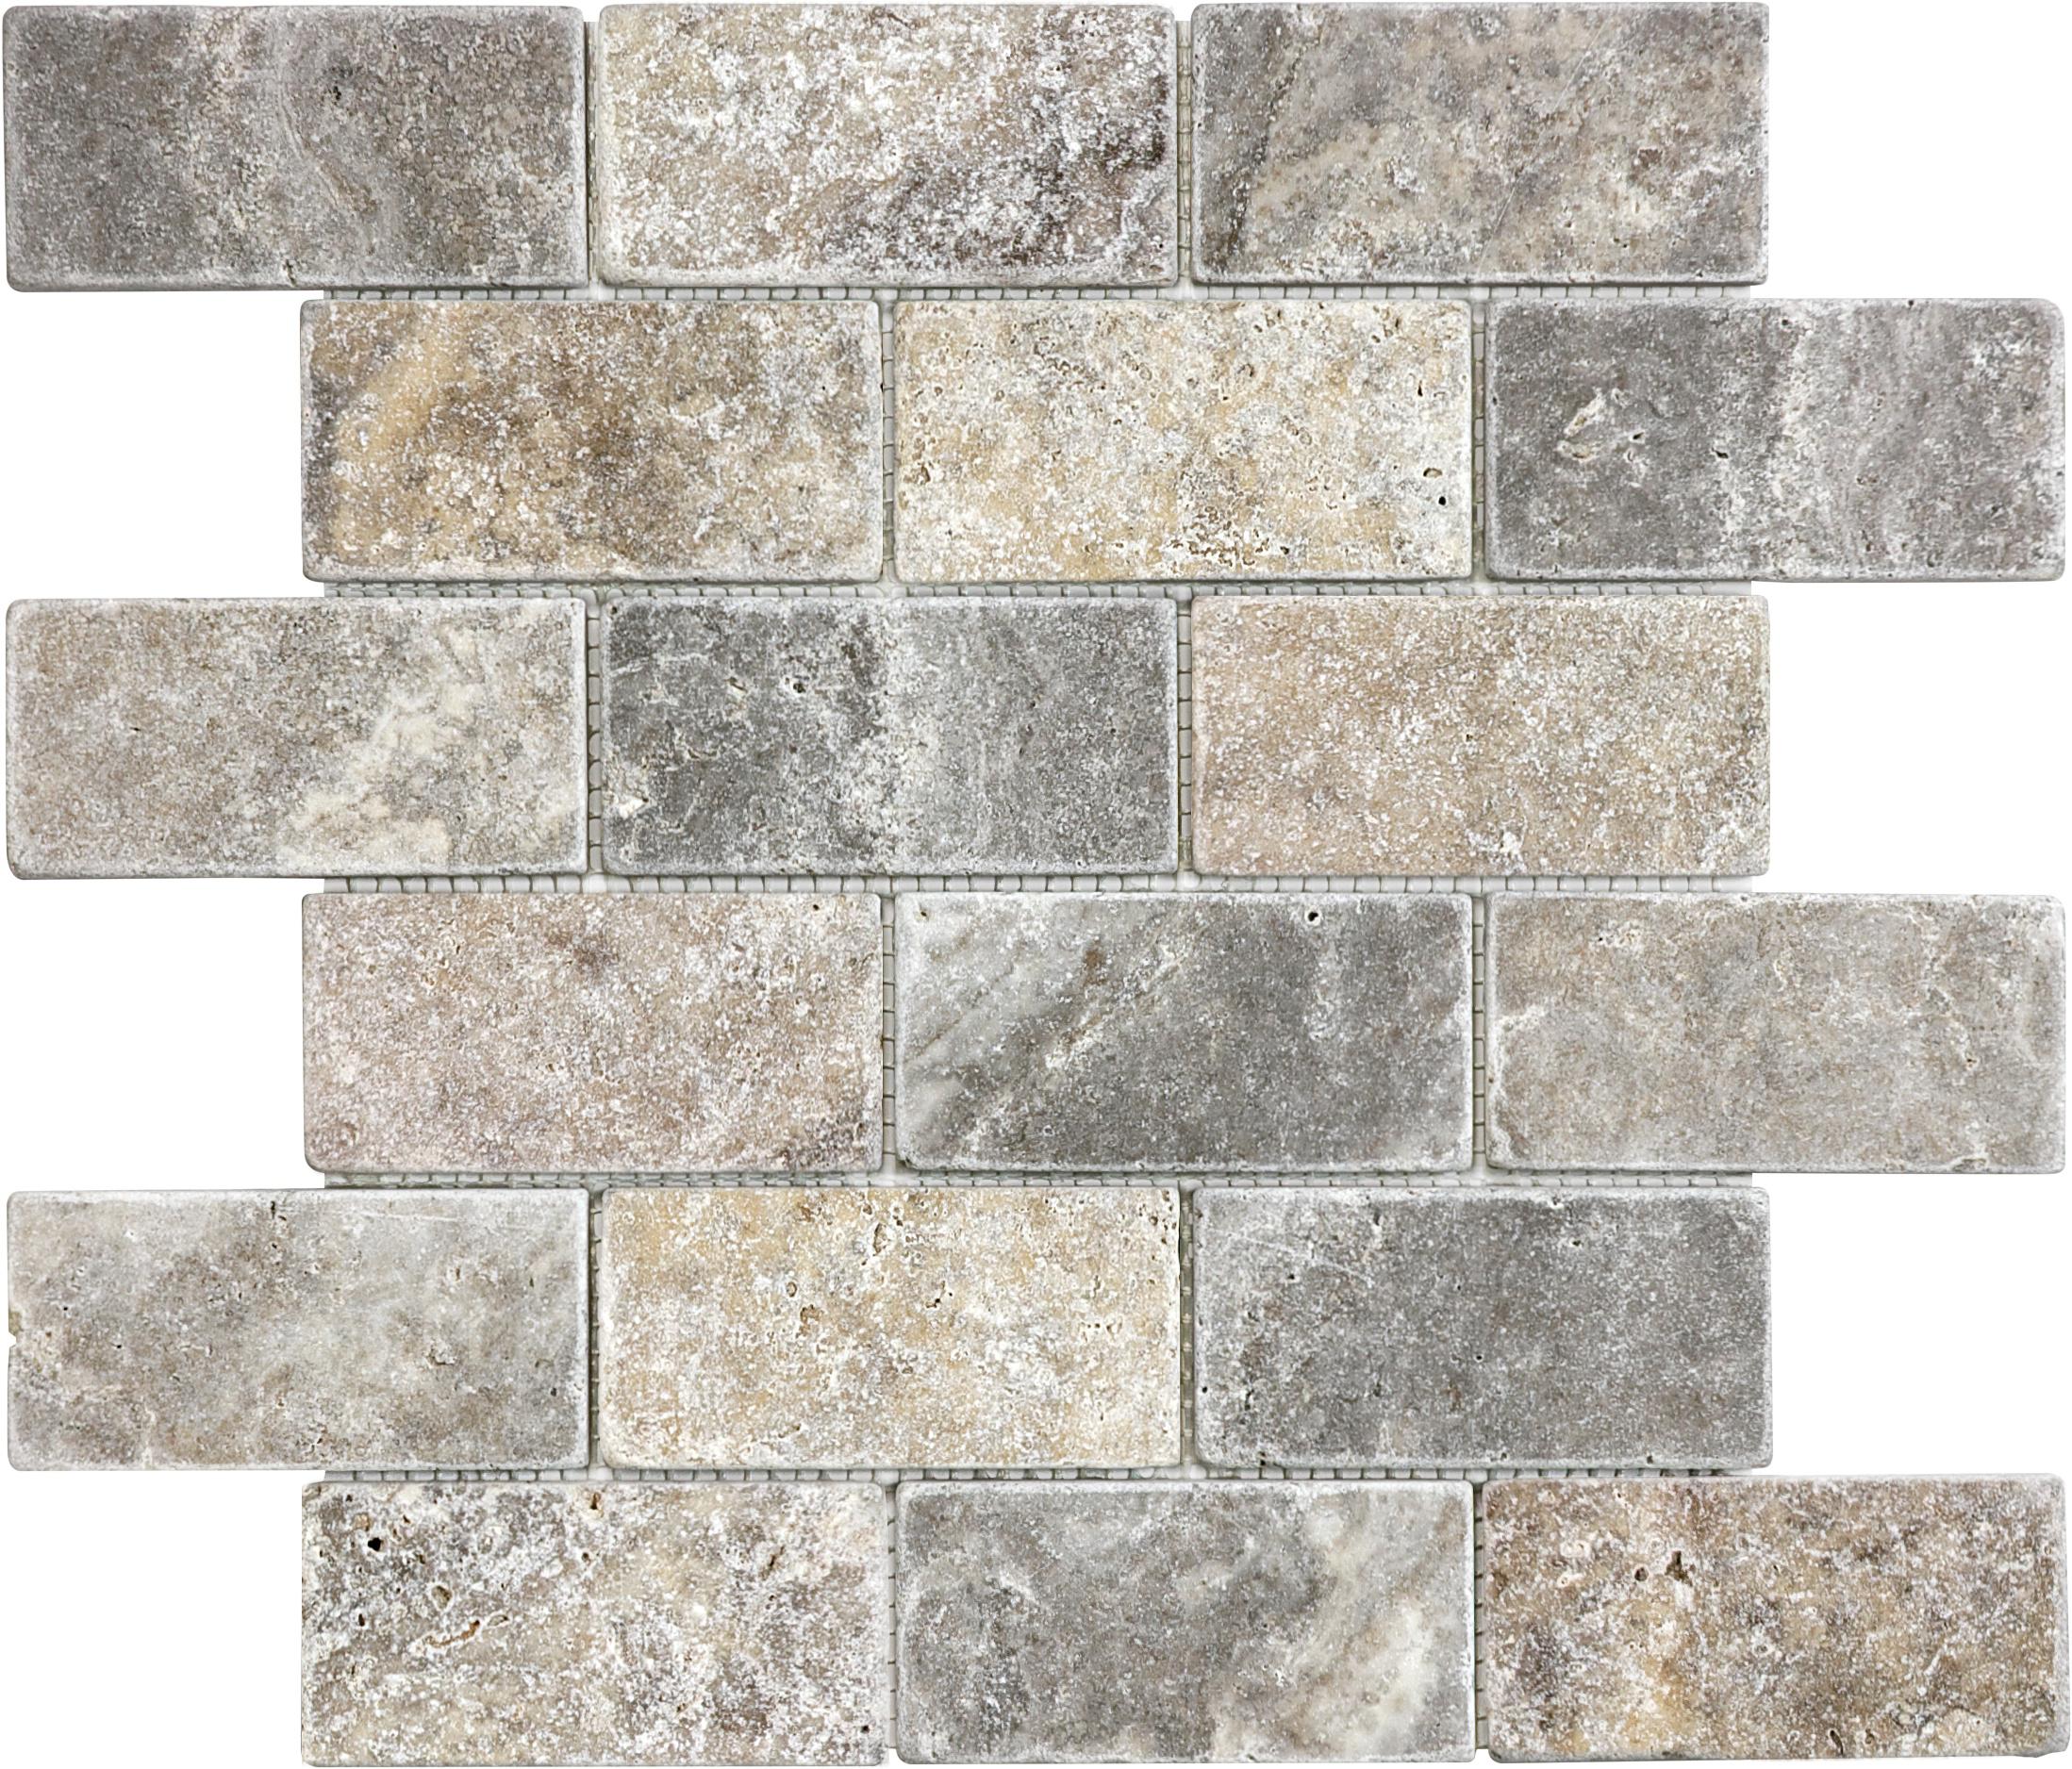 travertine brick offset 2x4-inch pattern natural stone mosaic from silver ash anatolia collection distributed by surface group international tumbled finish tumbled edge mesh shape